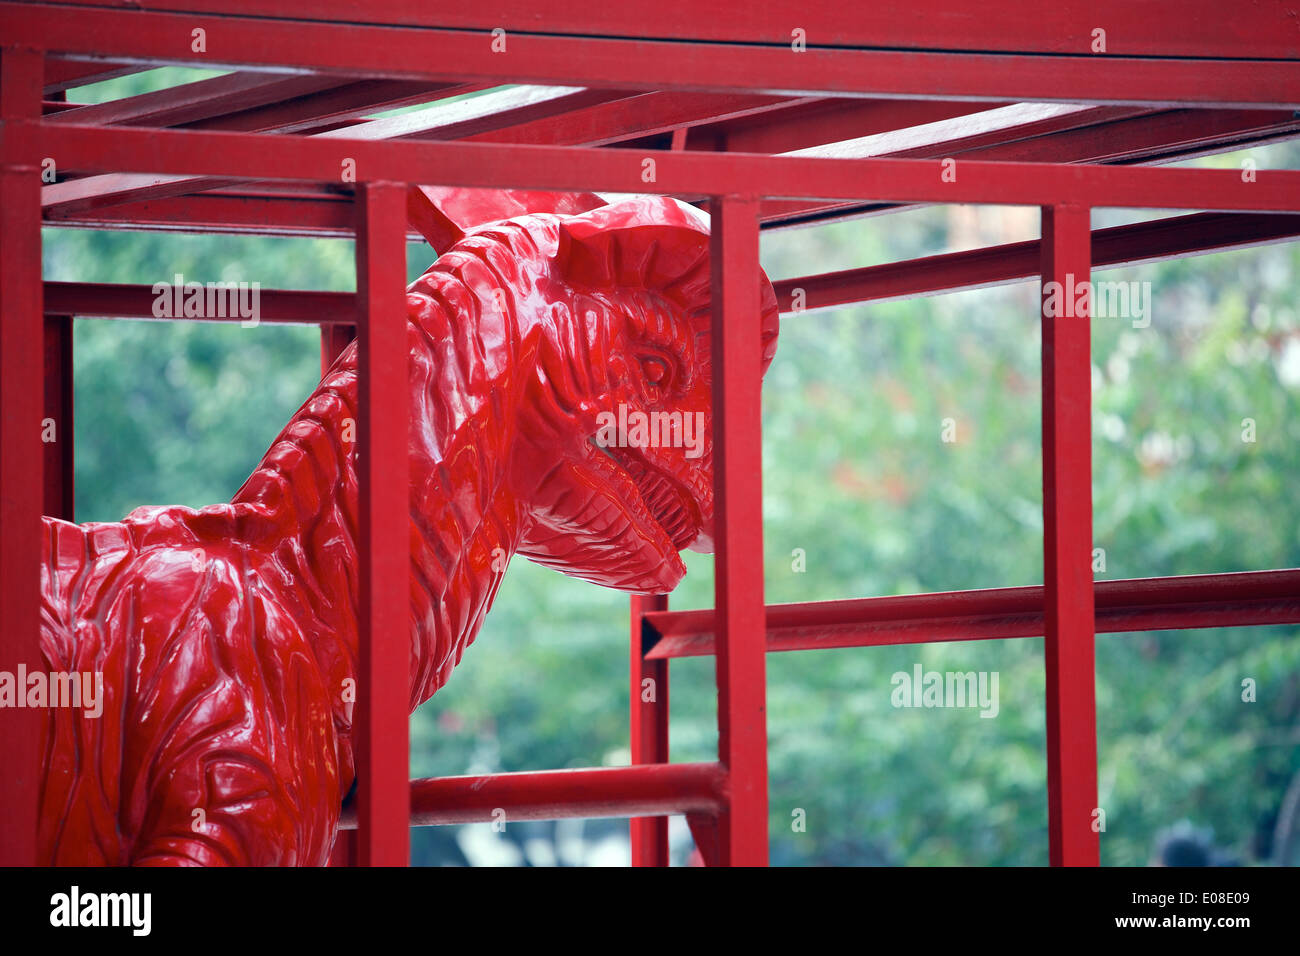 Sculpture Of A Red Dinosaur In The 798 Art District, Beijing, China. Stock Photo